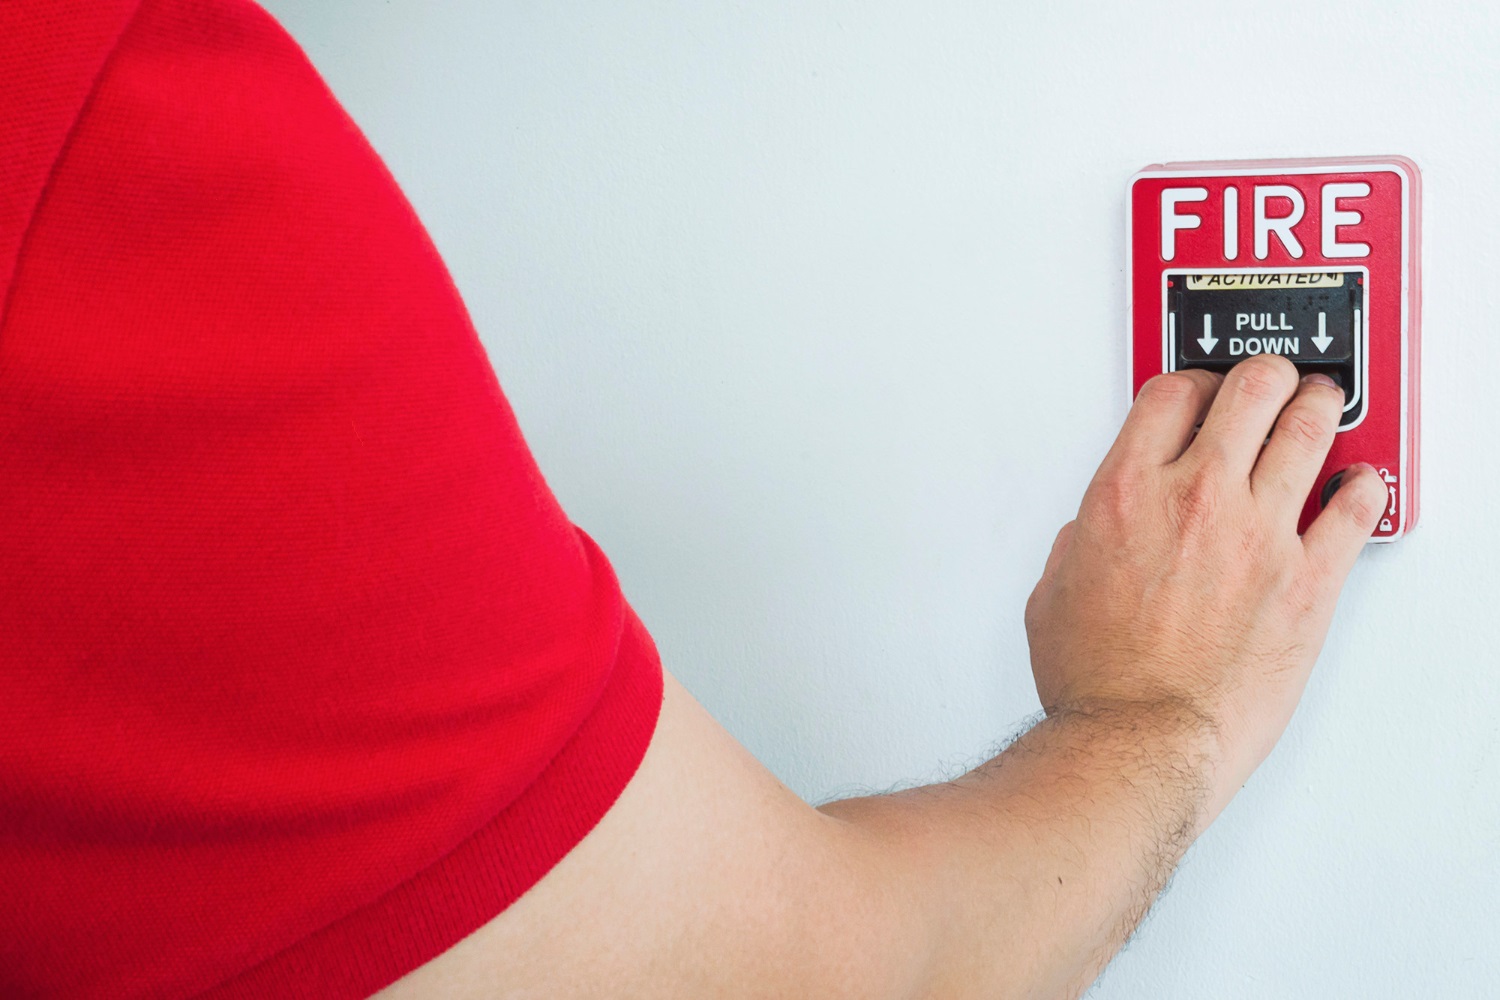 a person wearing red shirt is pulling fire emergency button